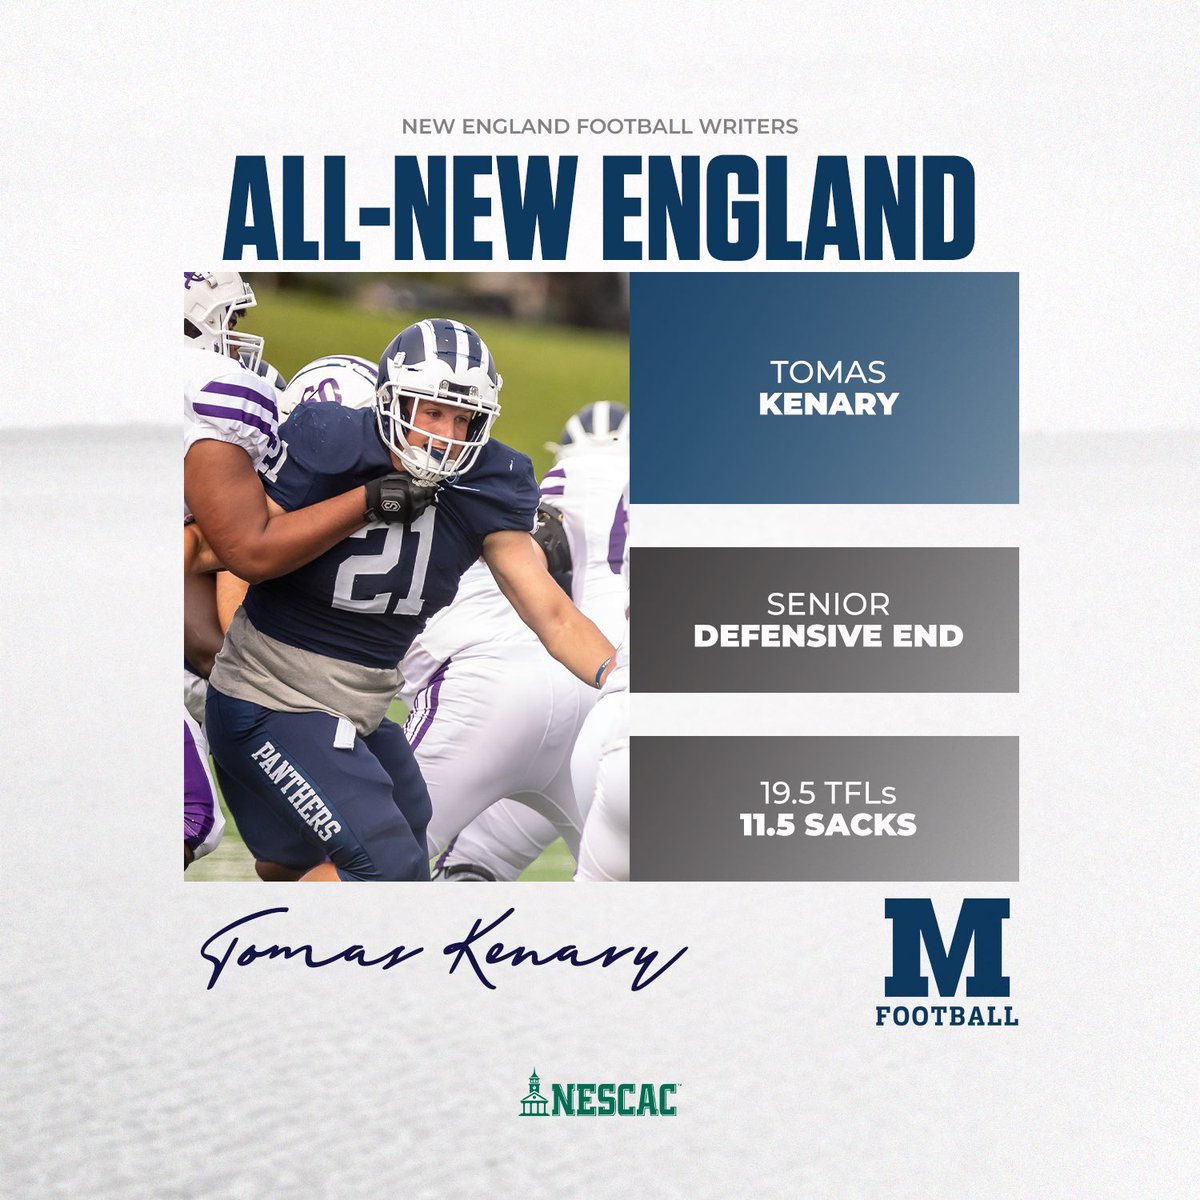 Congrats to Tommy Kenary for being selected to the 2023 New England Division II/III All-New England Team